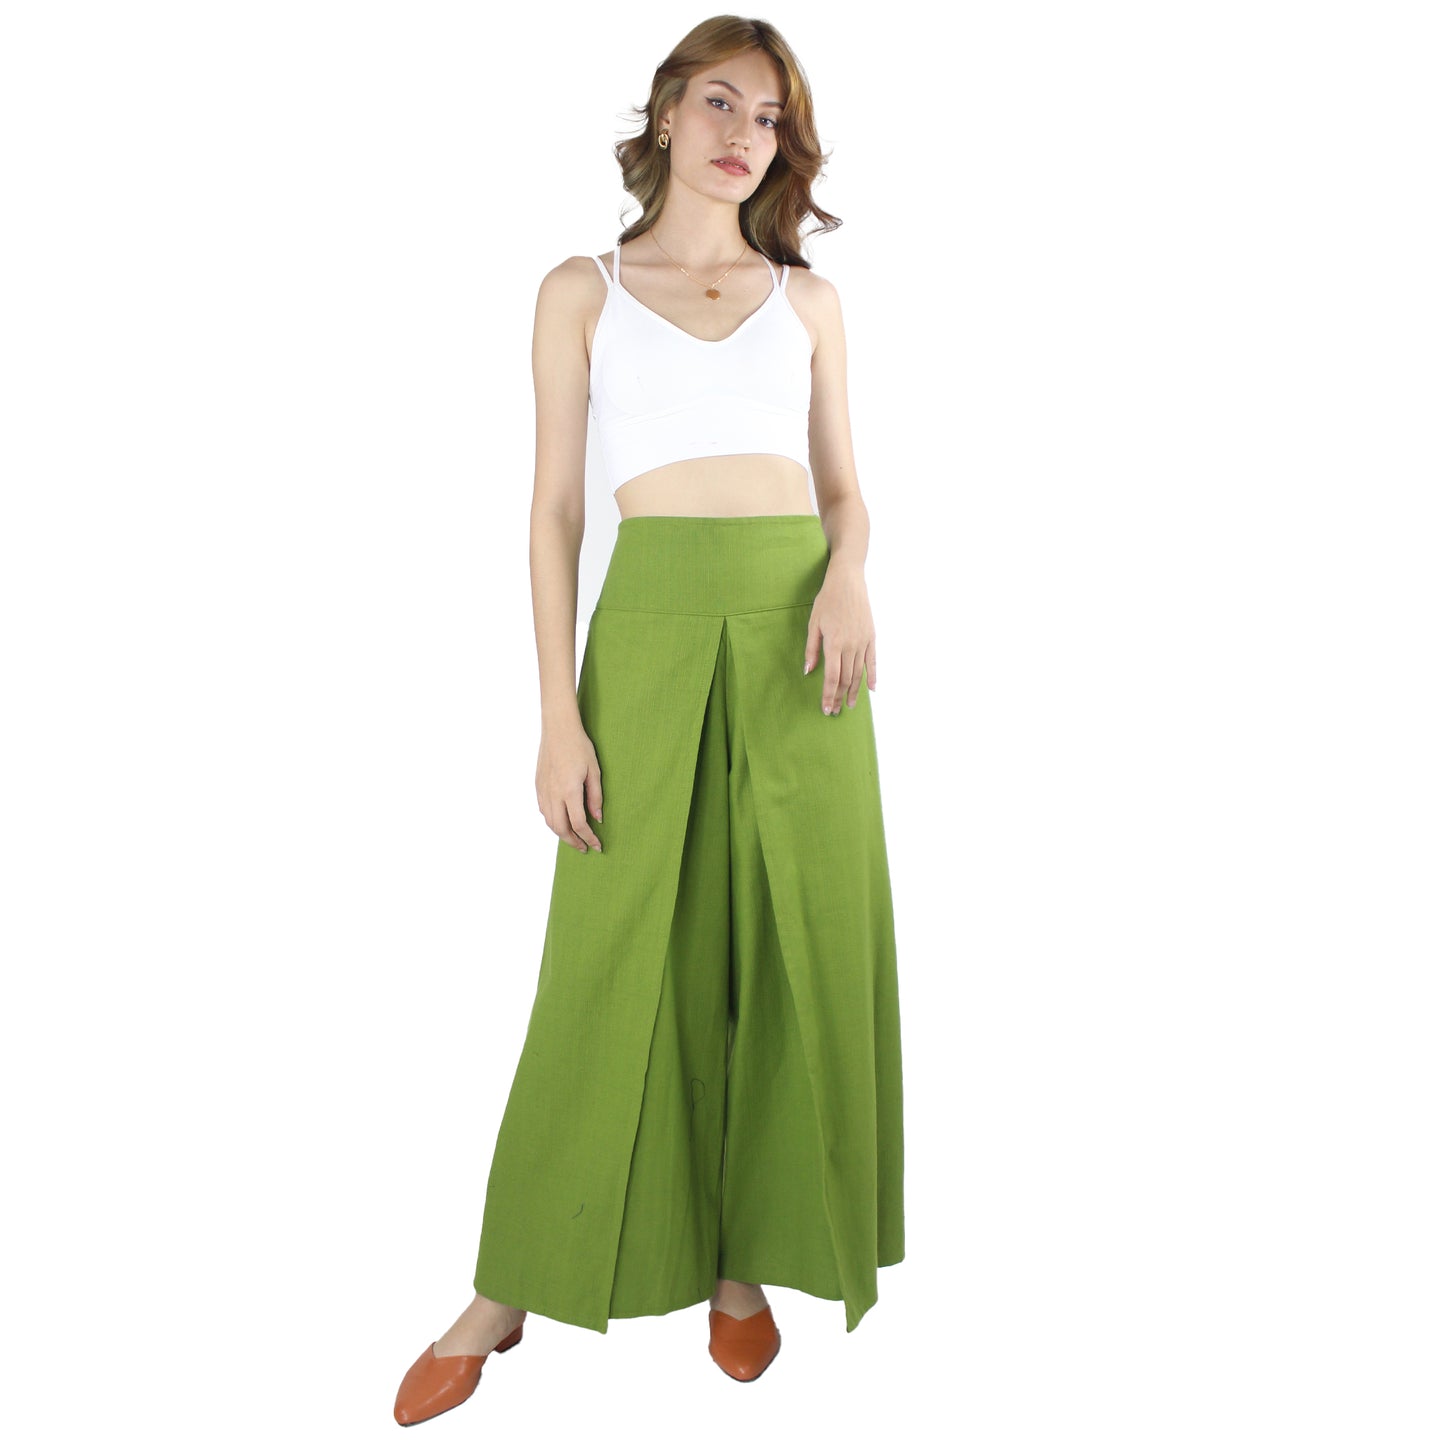 Solid Color Bamboo Cotton Palazzo Pants in Lime Green PP0076 140000 25